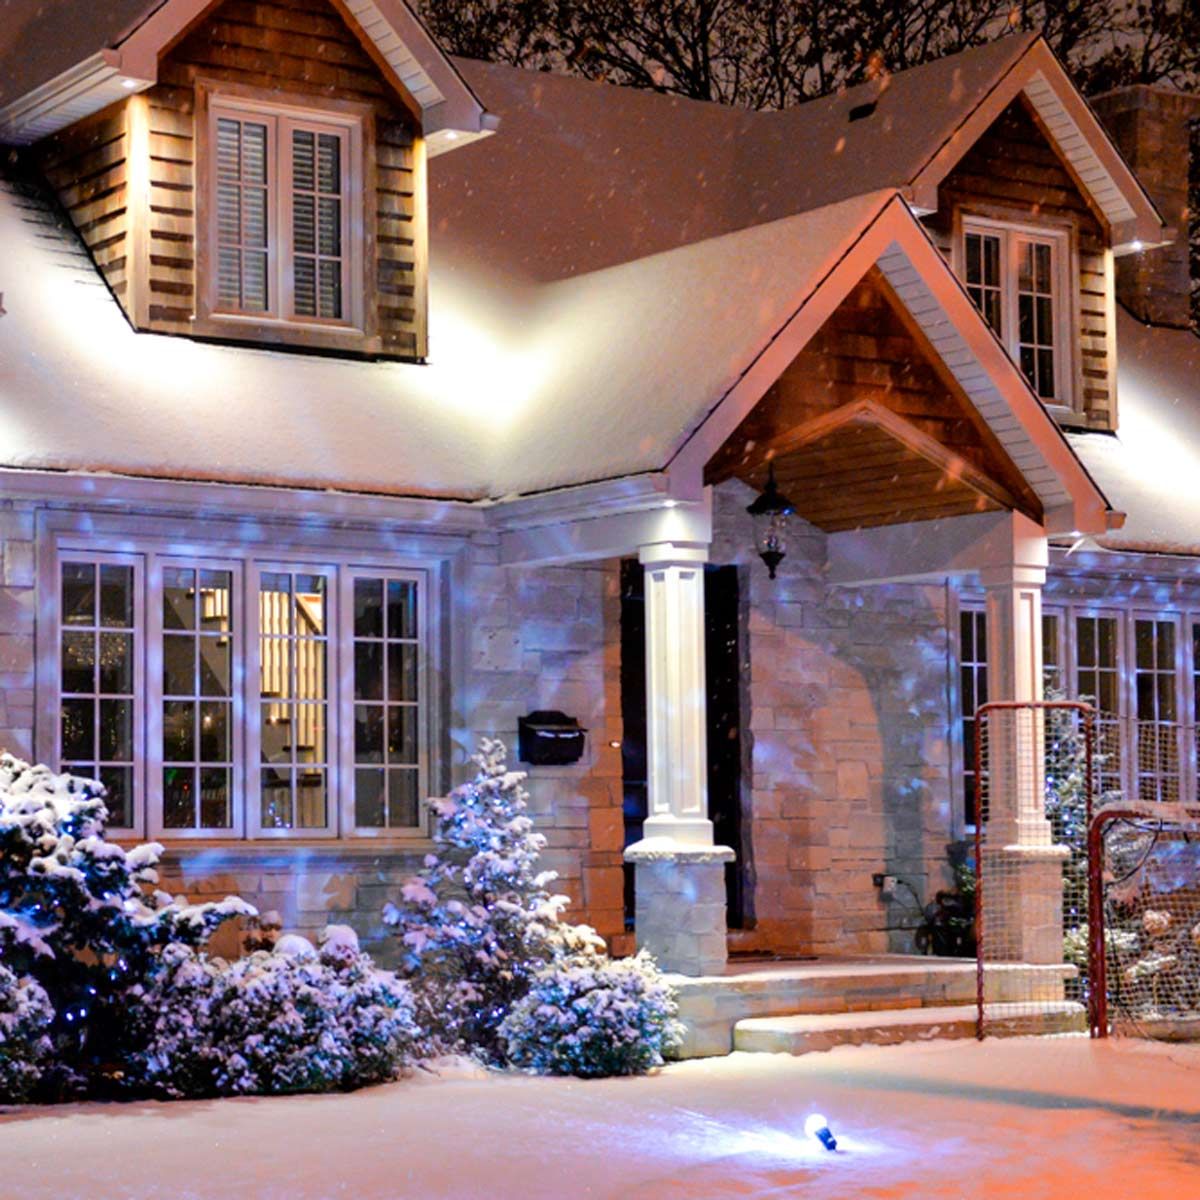 13 Ways to Keep Up Your Curb Appeal in Winter